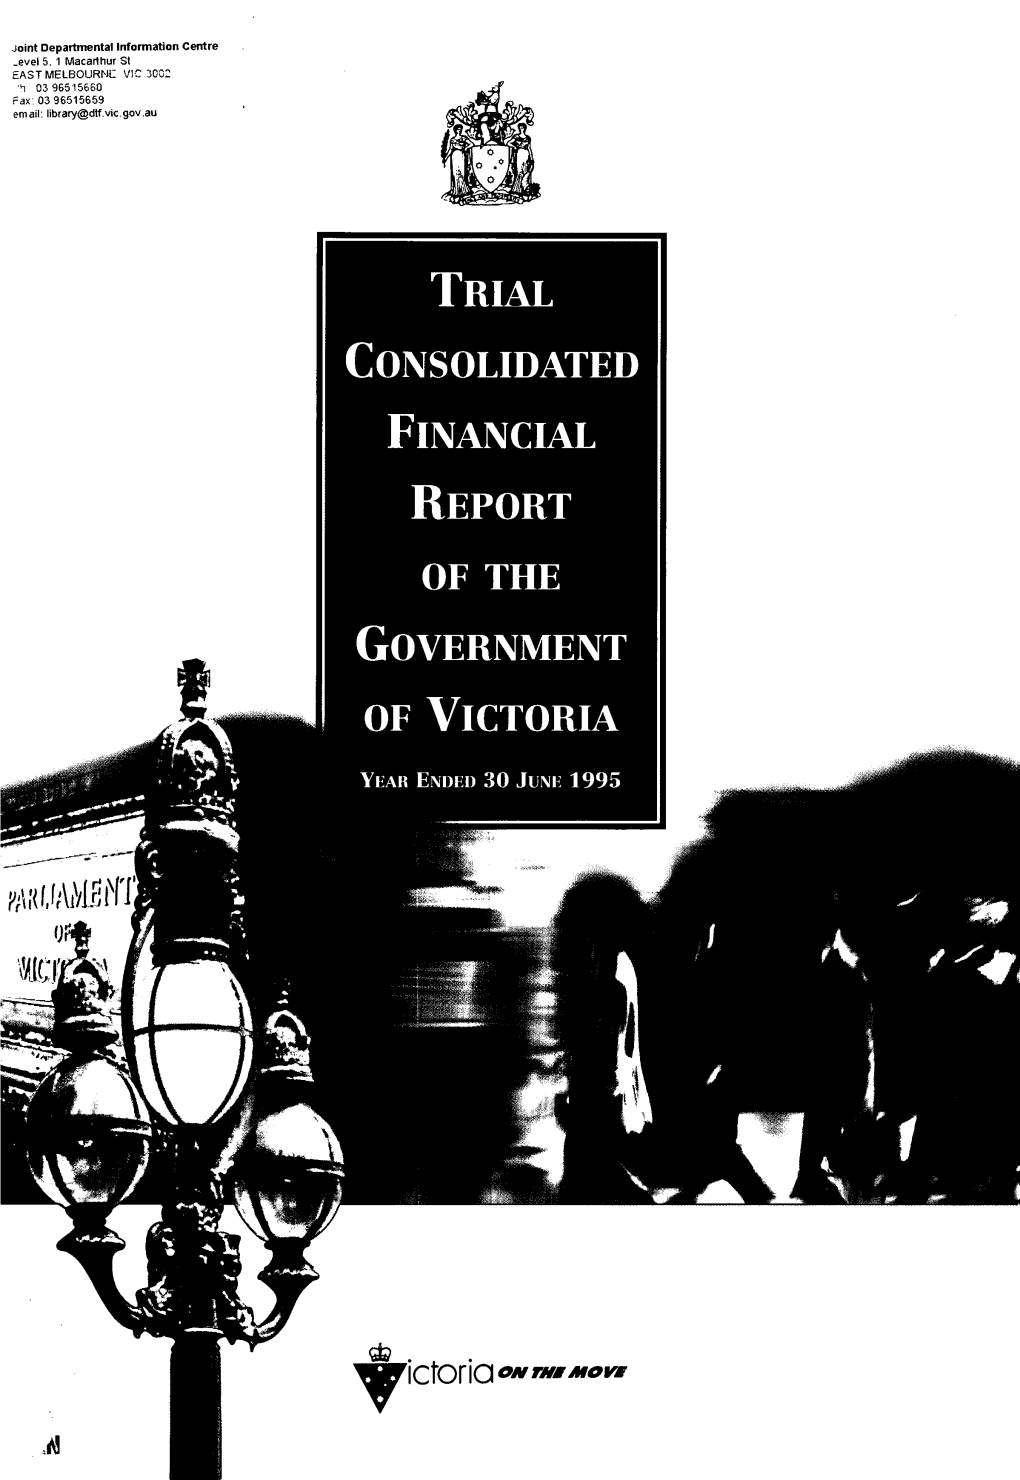 Trial Consolidated Financial Report of the Government of Victoria